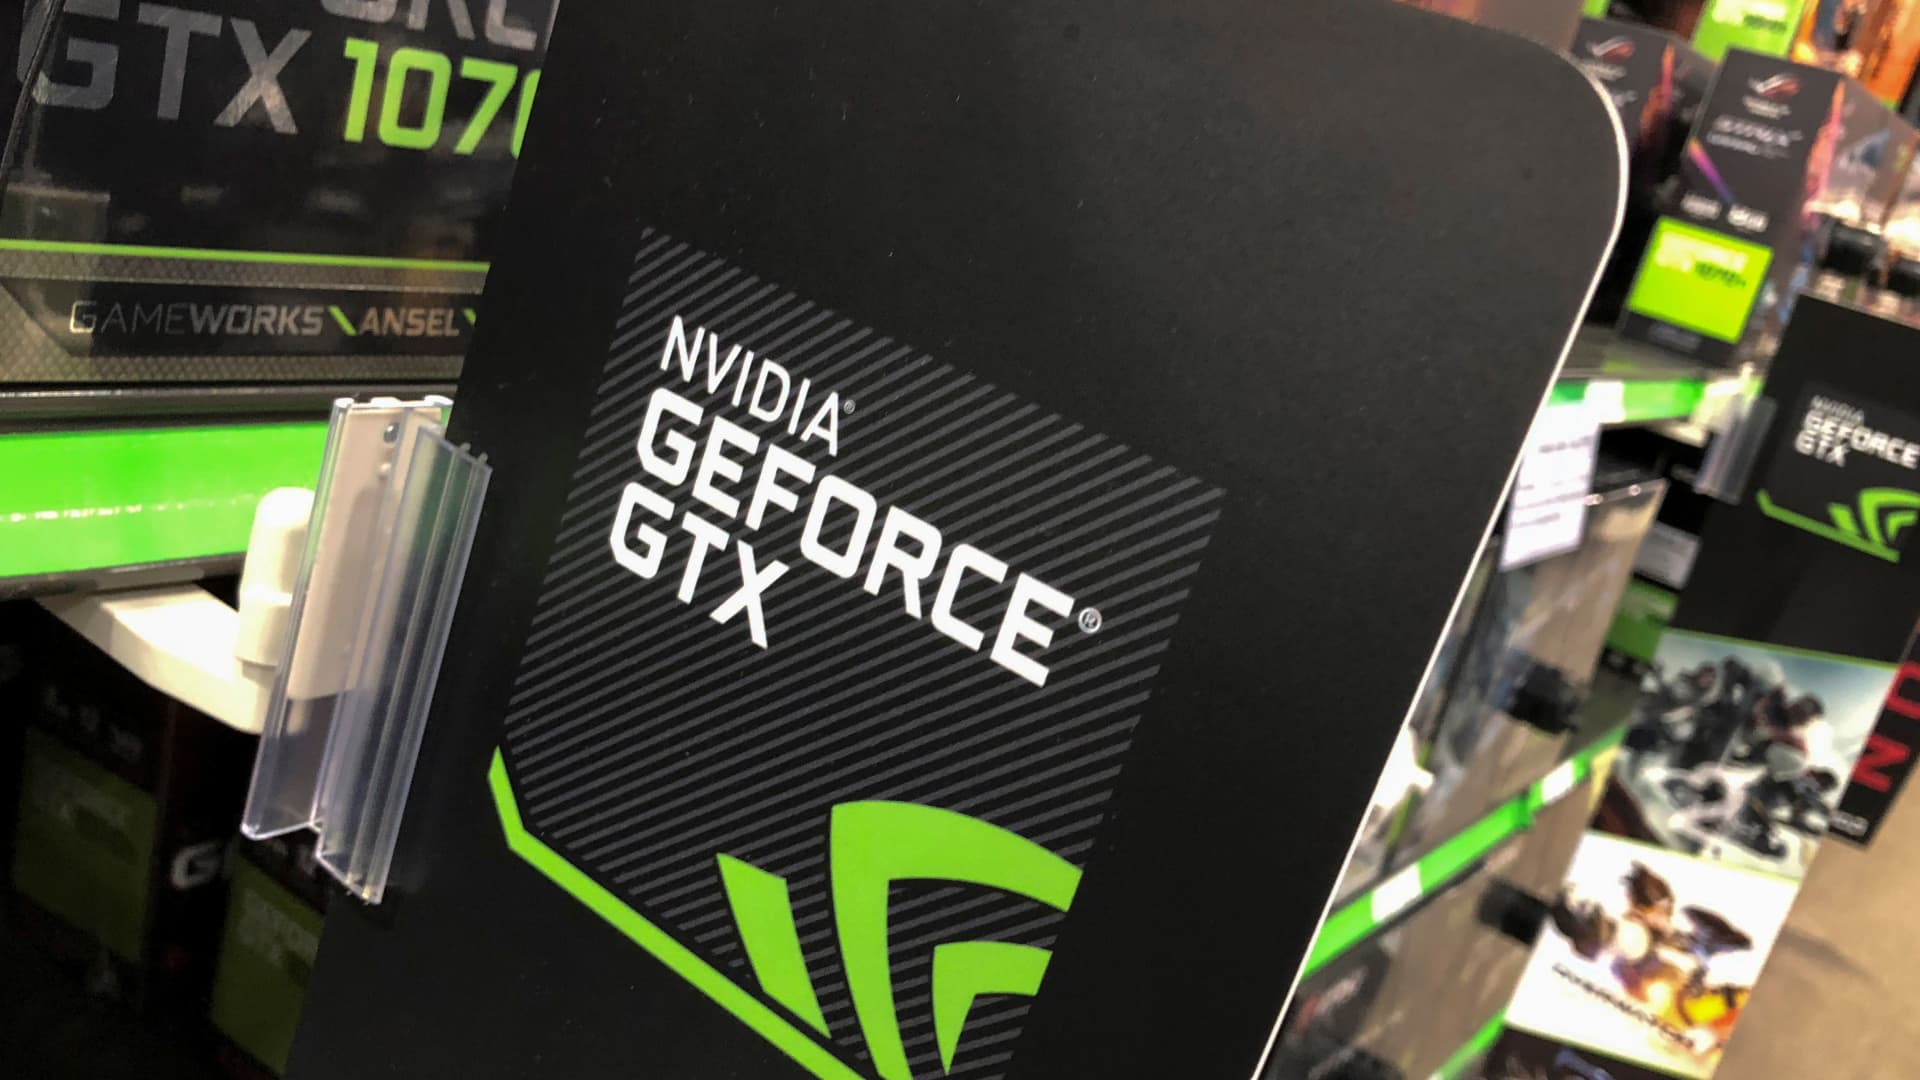 Nvidia is a buy even with weaker guidance from China lockdowns, Wall Street says